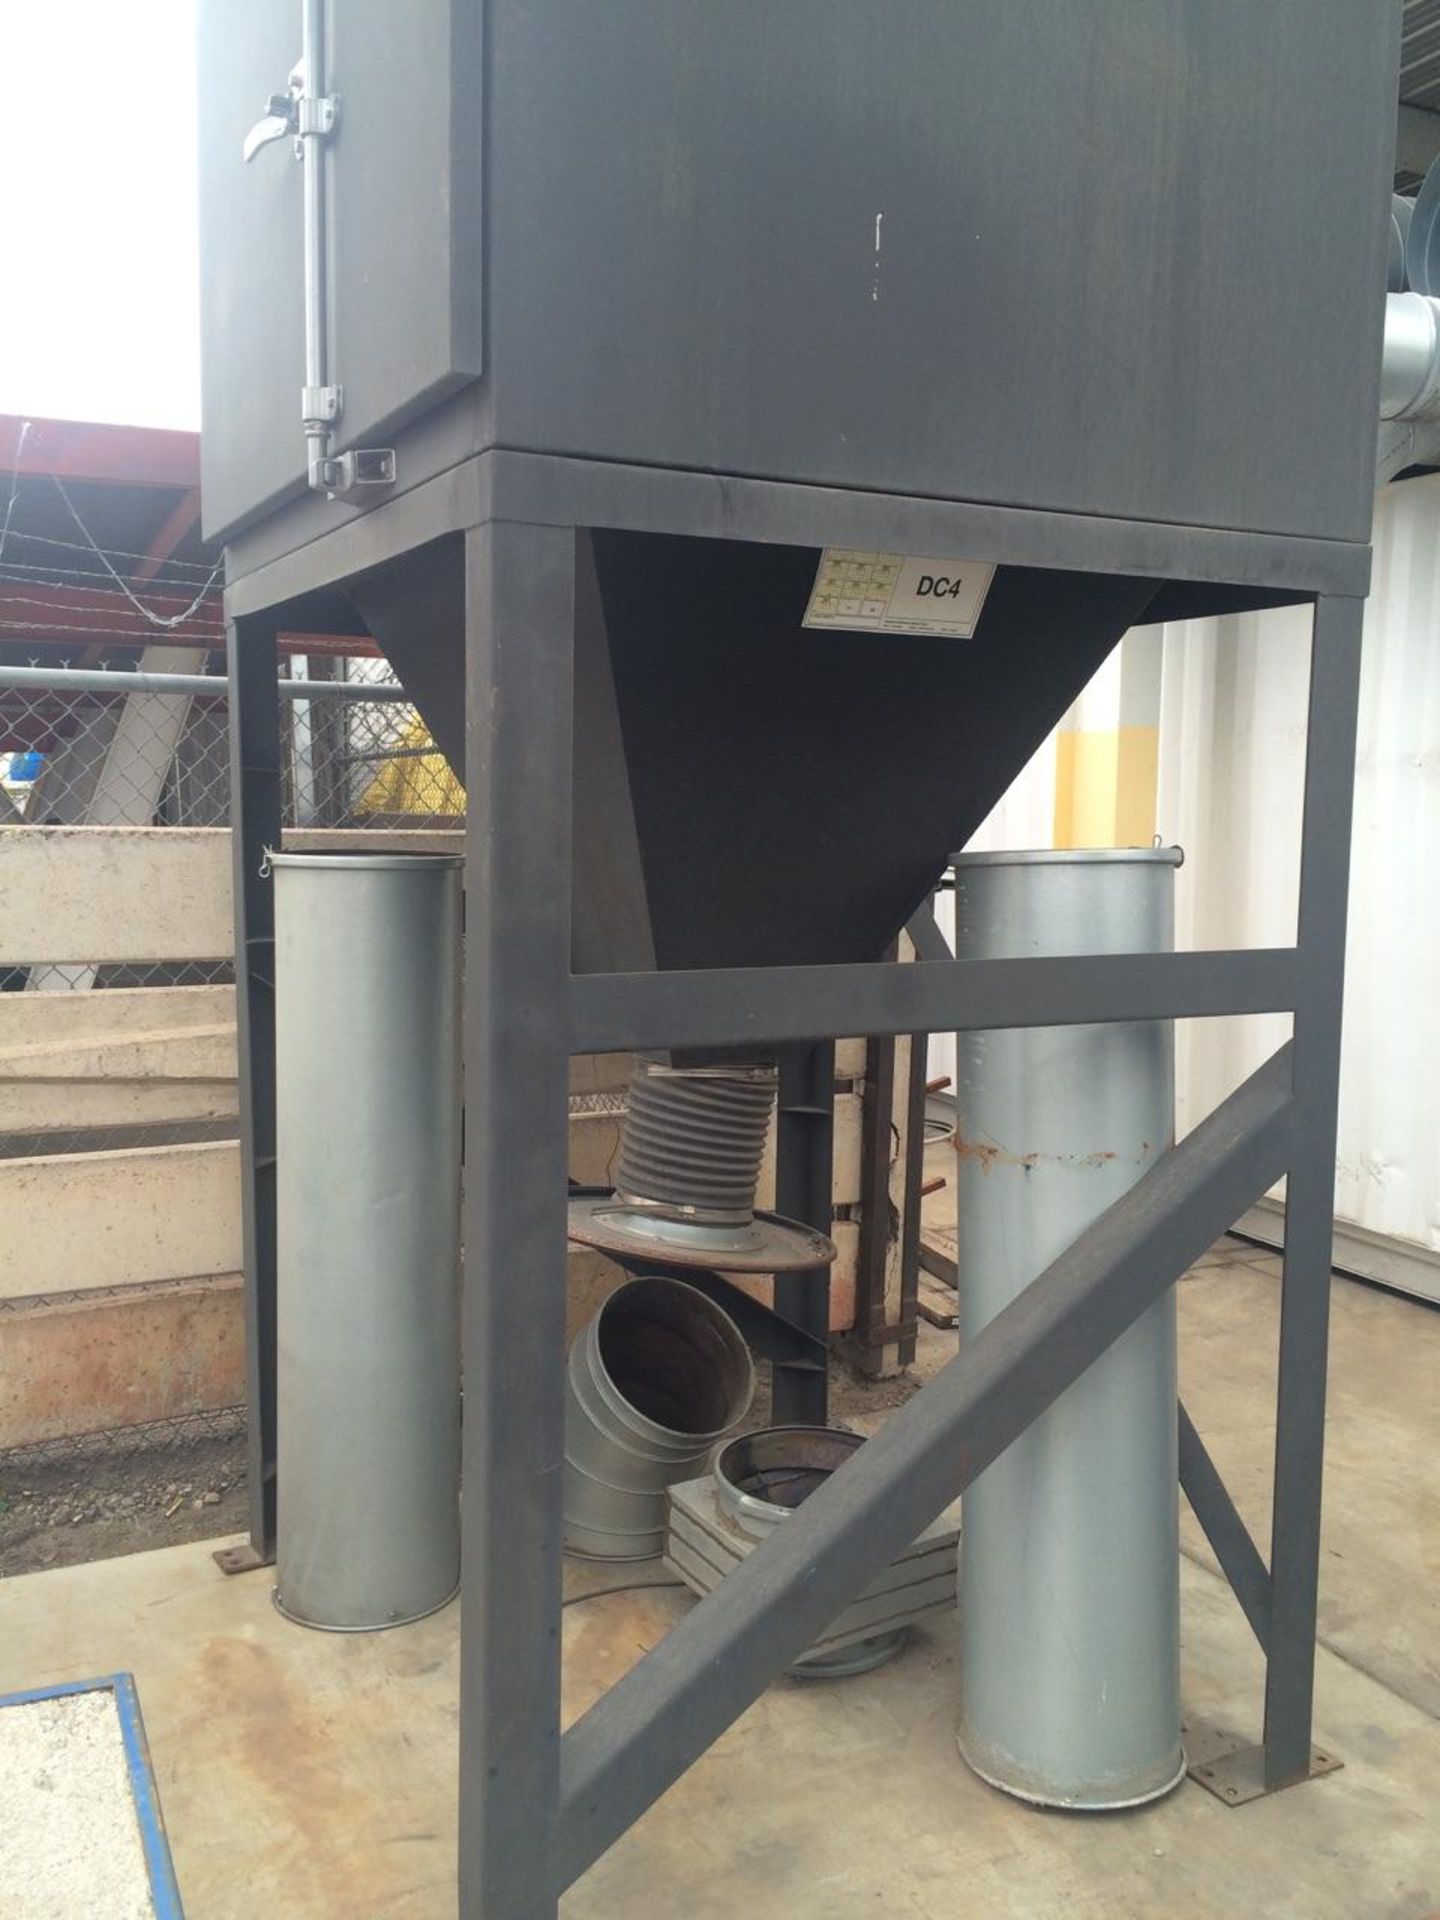 GREAT LAKES PLASER DUST COLLECTOR LOCATED AT: ARIZONA AUCTIONEERS